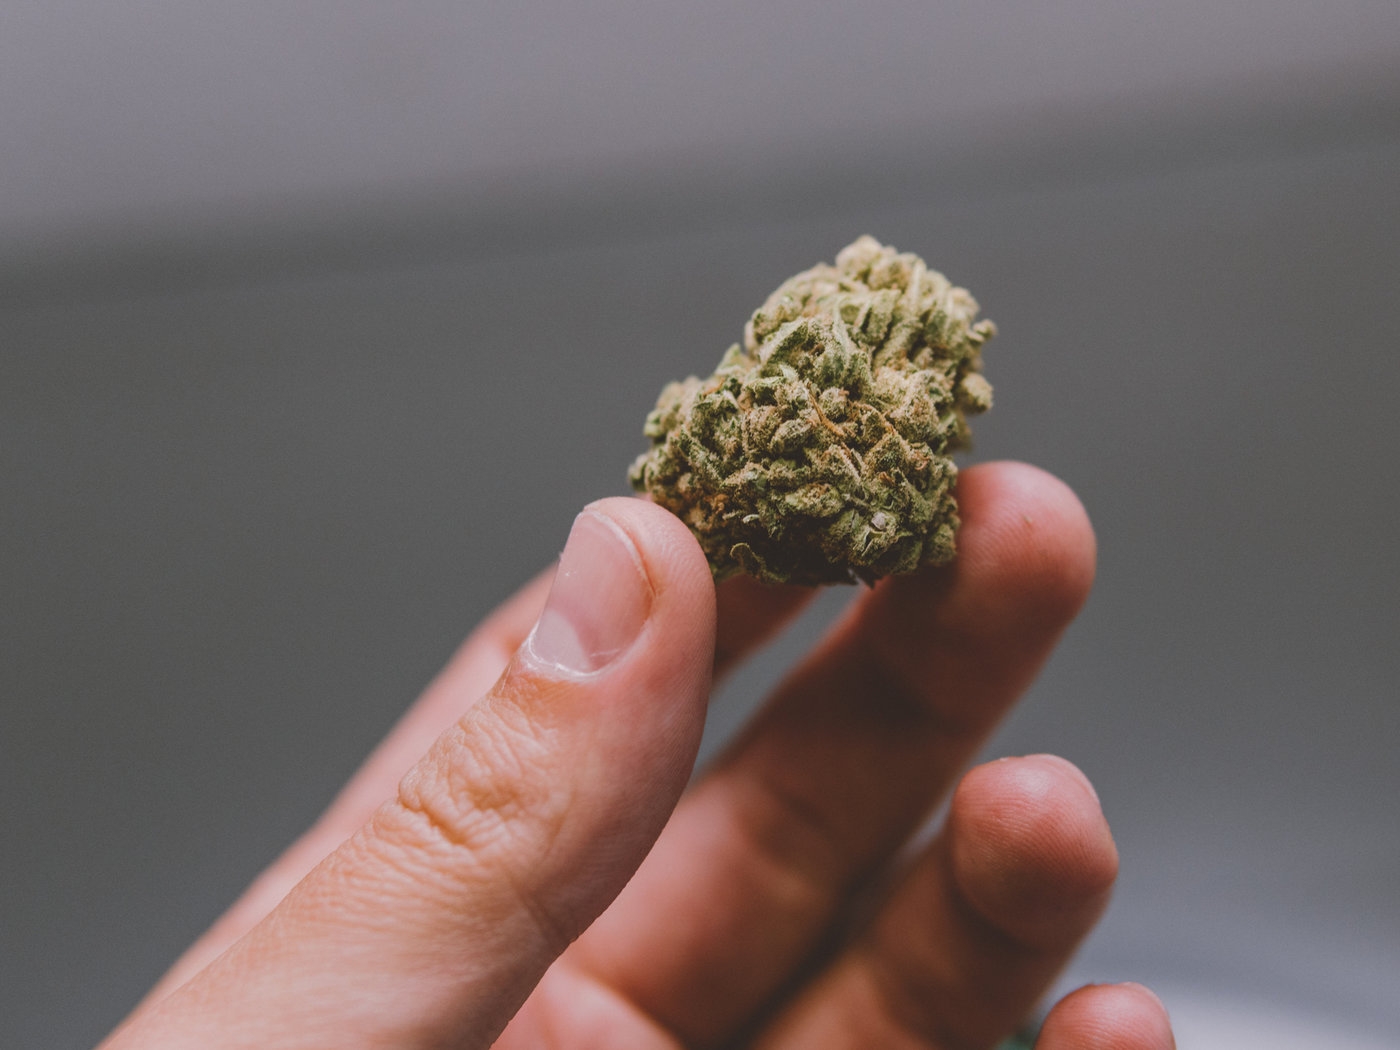 Daily Marijuana Use And Highly Potent Weed Linked To Psychosis